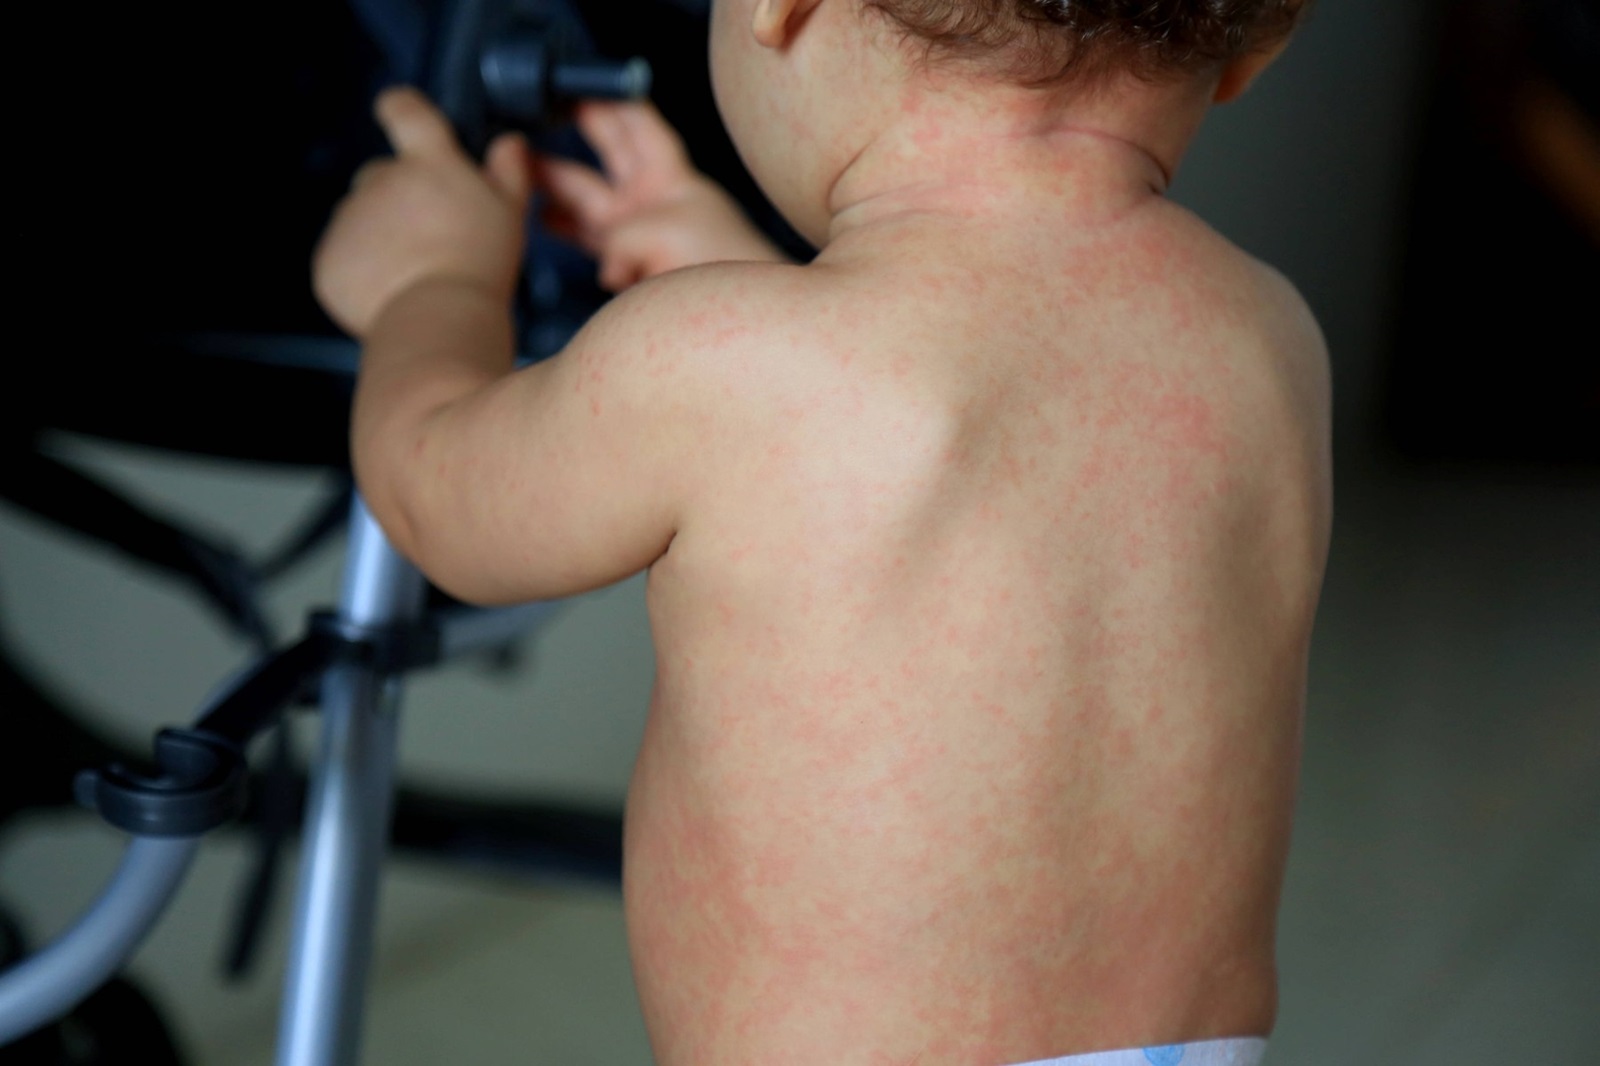 child with measles symptoms salvador, bahia / brazil - february 14, 2017: Child with measles symptoms is seen with small red spots on body and feverish state. *** Local Caption *** . SALVADOR BAHIA BRASIL Copyright: xJoaxSouzax 220117JOA04Z,Image: 803183970, License: Rights-managed, Restrictions: imago is entitled to issue a simple usage license at the time of provision. Personality and trademark rights as well as copyright laws regarding art-works shown must be observed. Commercial use at your own risk., Credit images as "Profimedia/ IMAGO", Model Release: no, Credit line: Joa Souza / imago stock&people / Profimedia